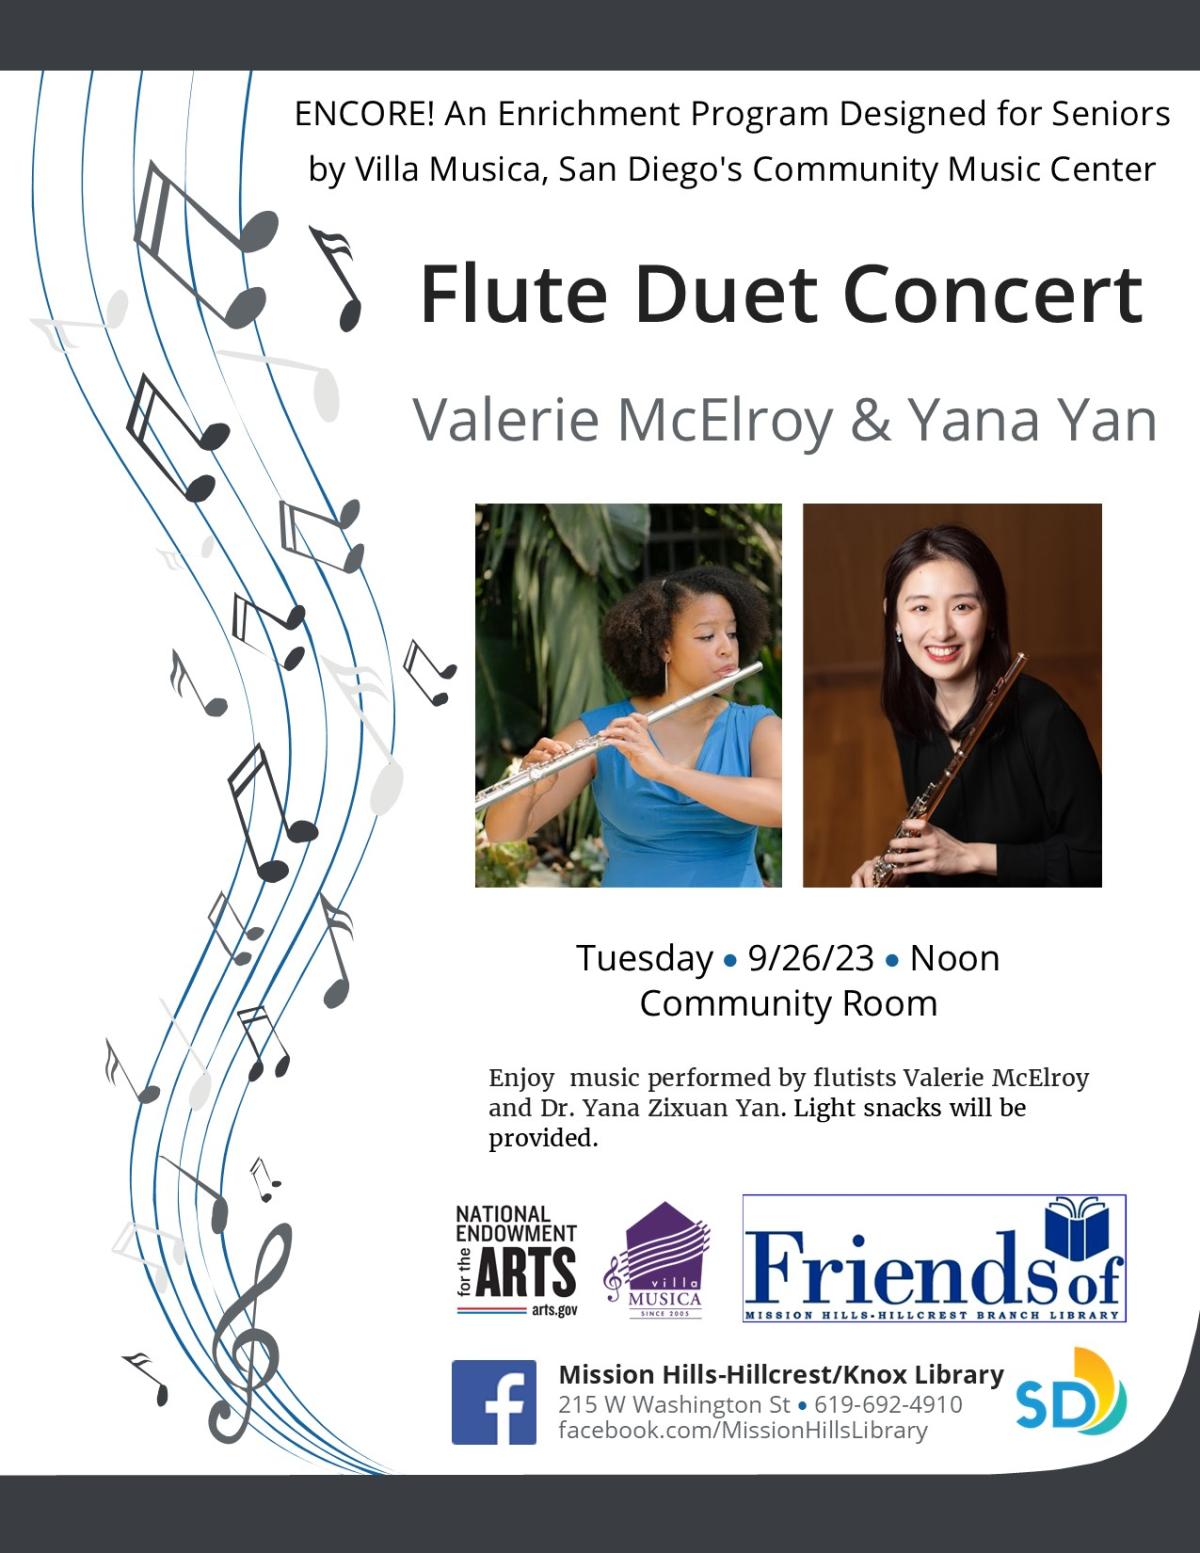 Flyer with information about concert and photos of McElroy and Yan holding flutes